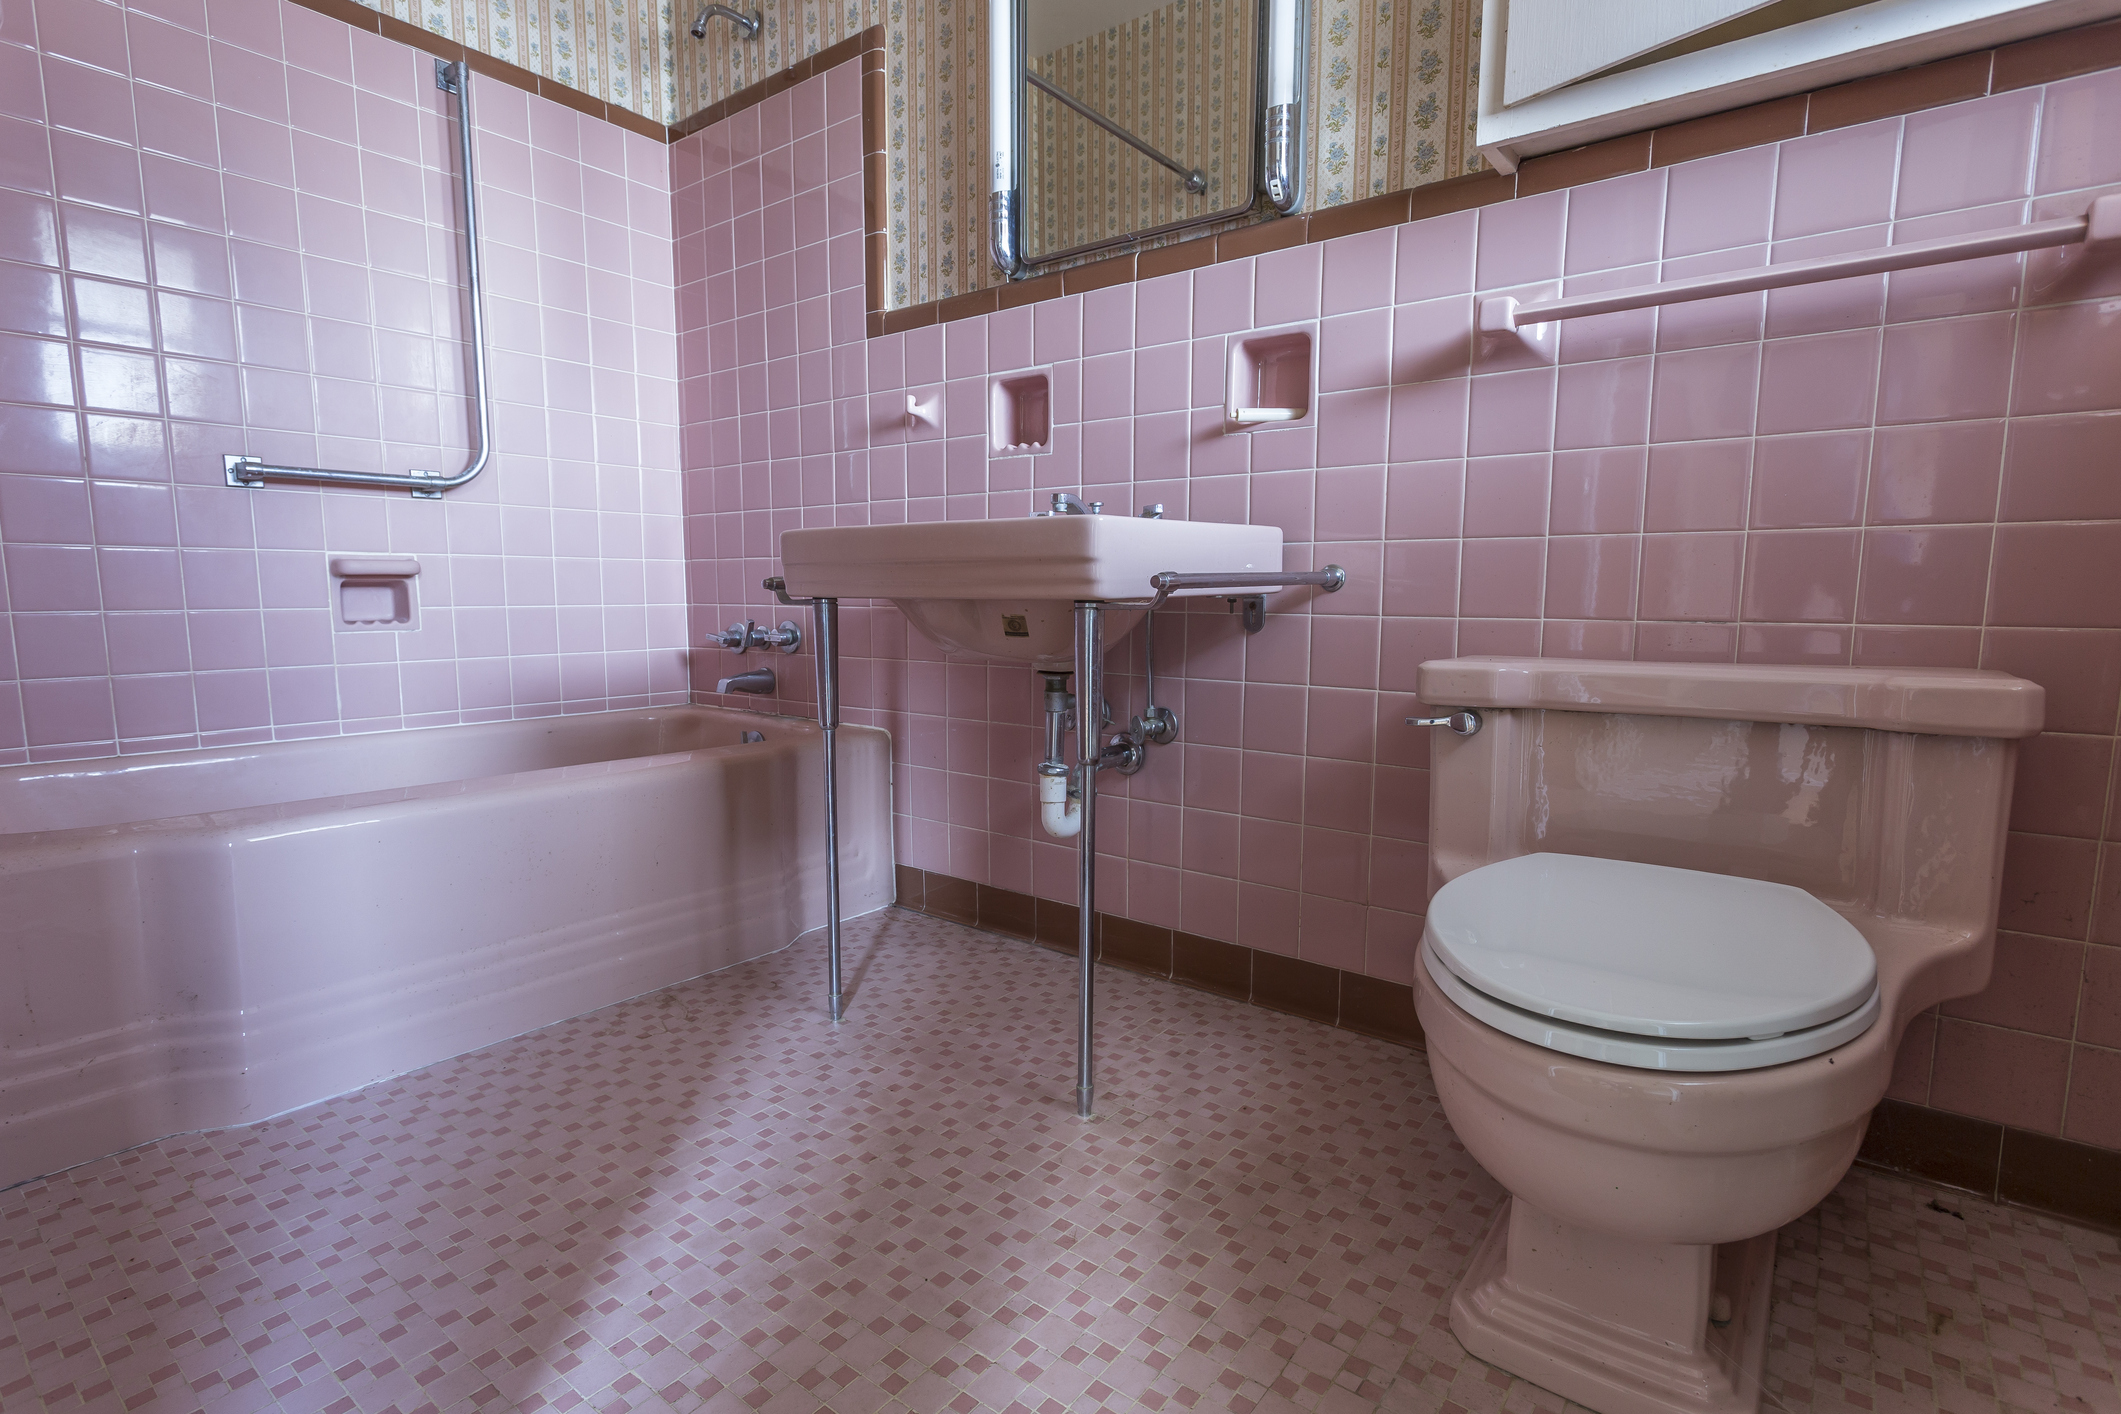 Fancy pink bathroom in a classic home